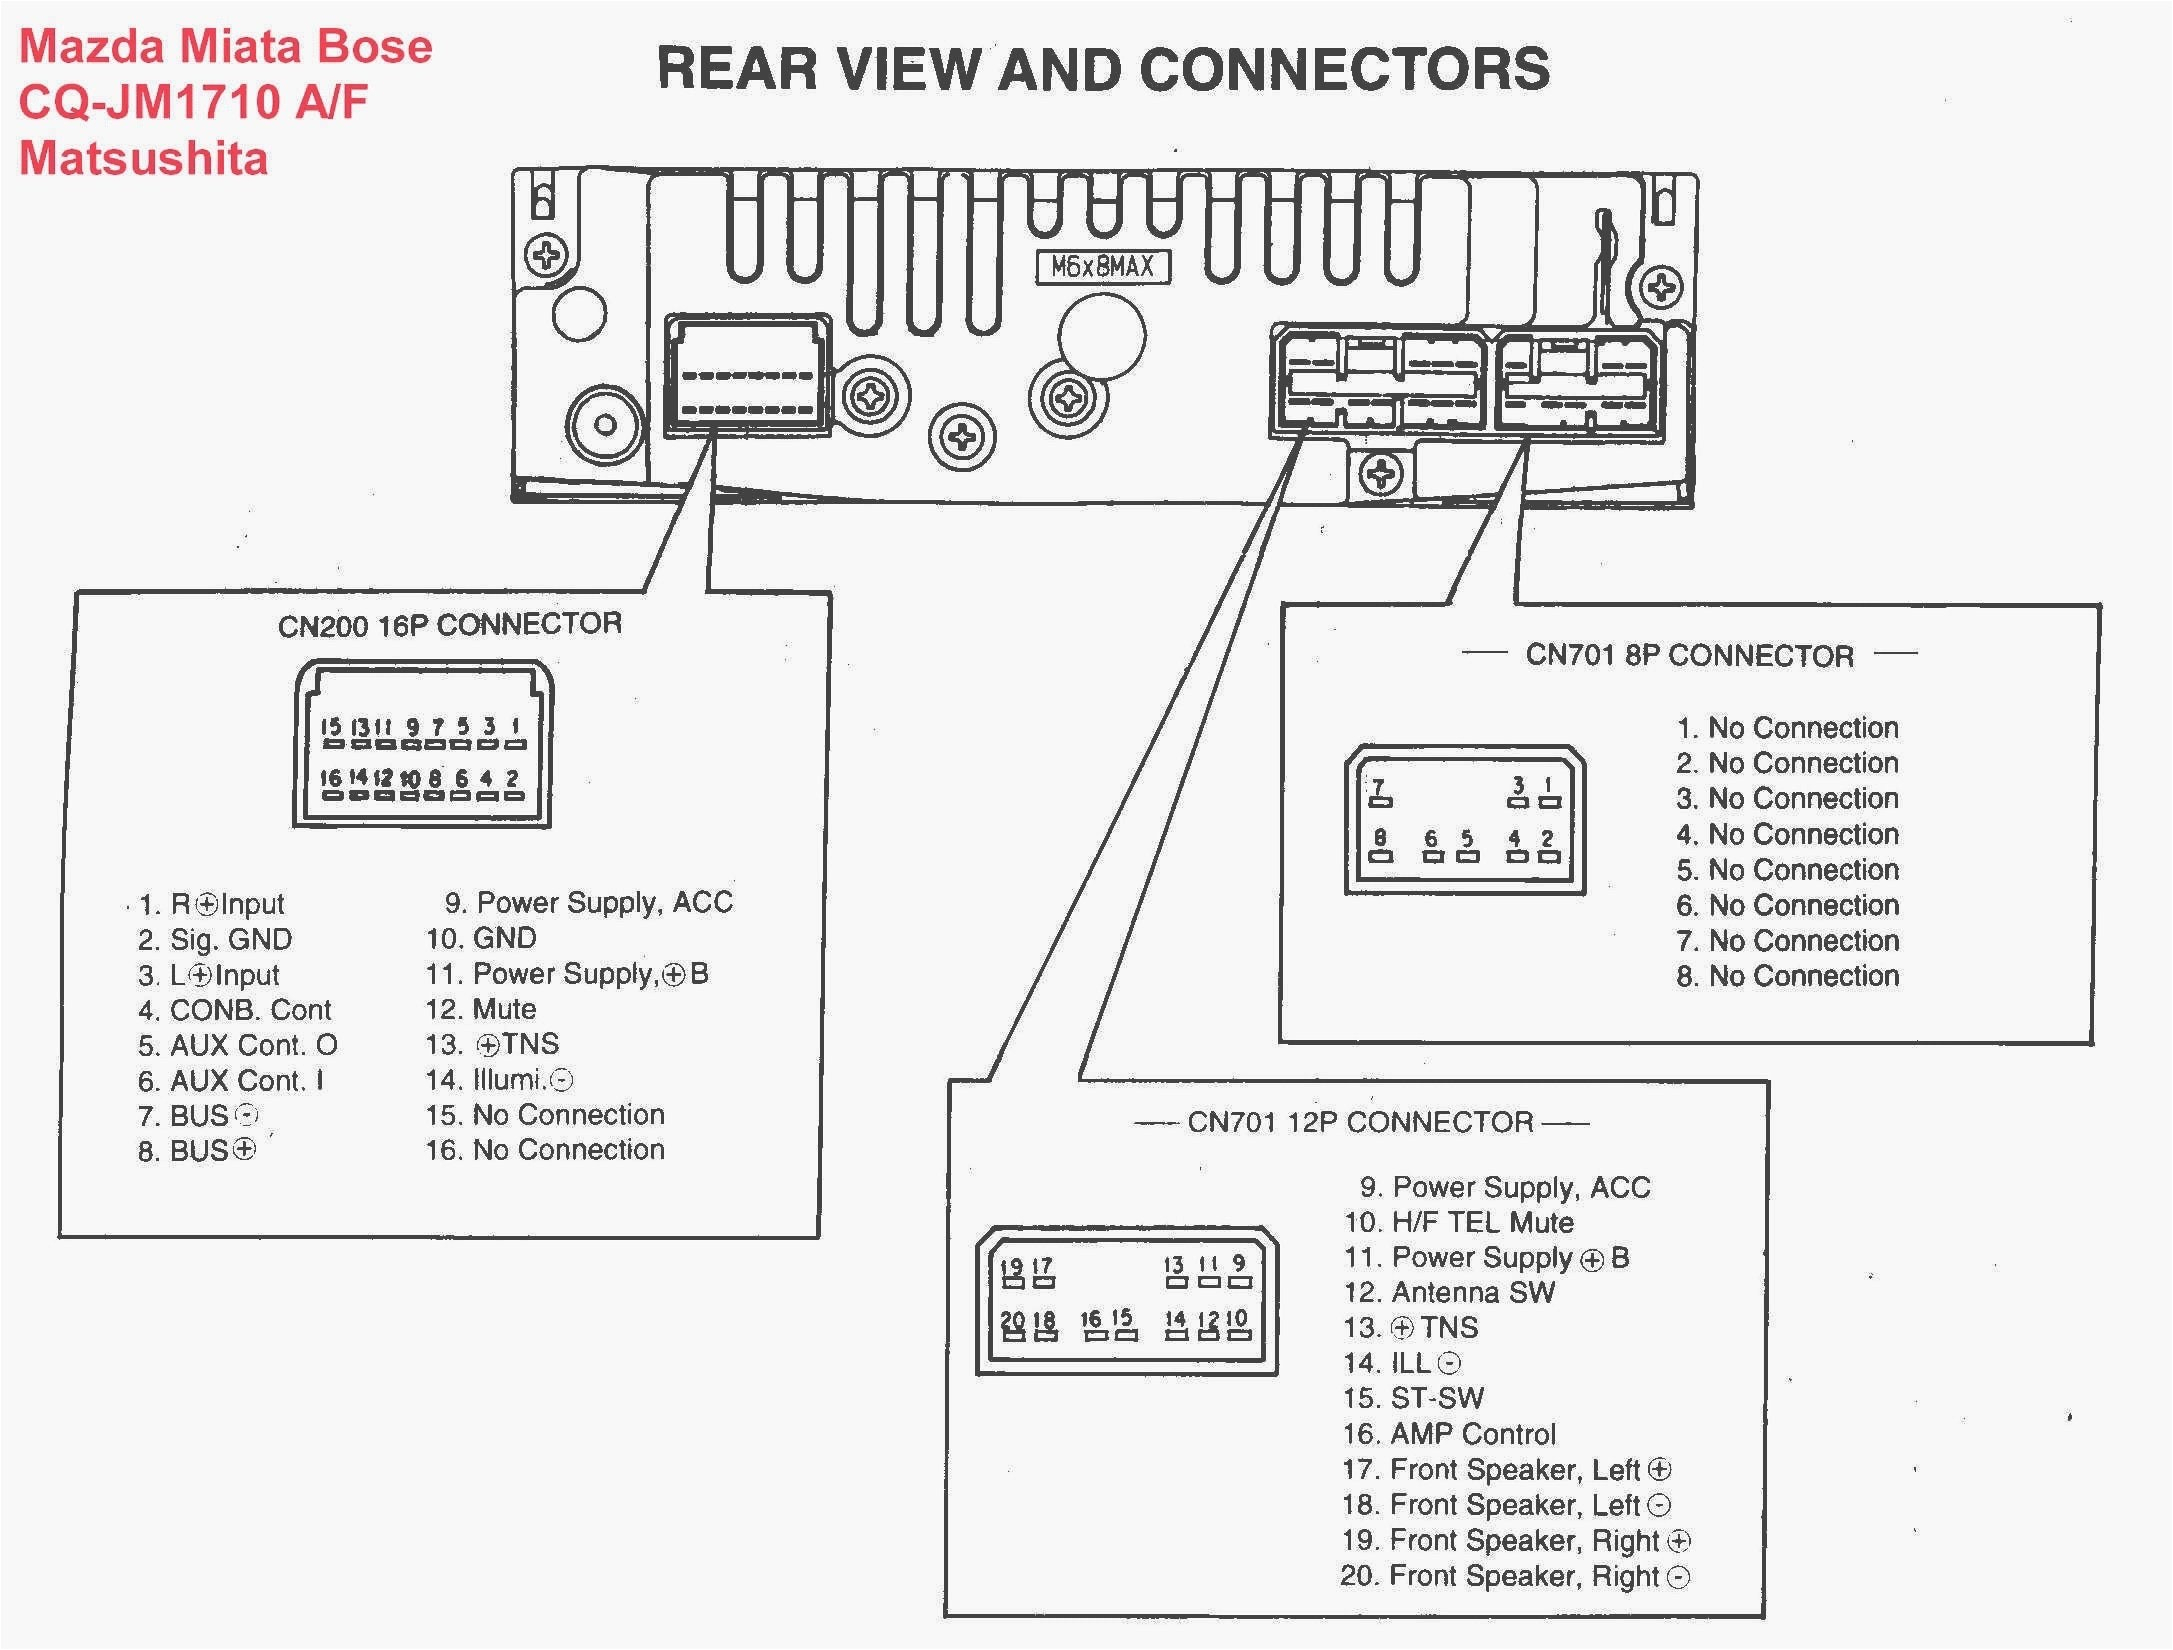 pioneer 16 pin wiring harness diagram on images of a pioneer 14 pin pioneer avh moreover pioneer wiring harness diagram likewise wire